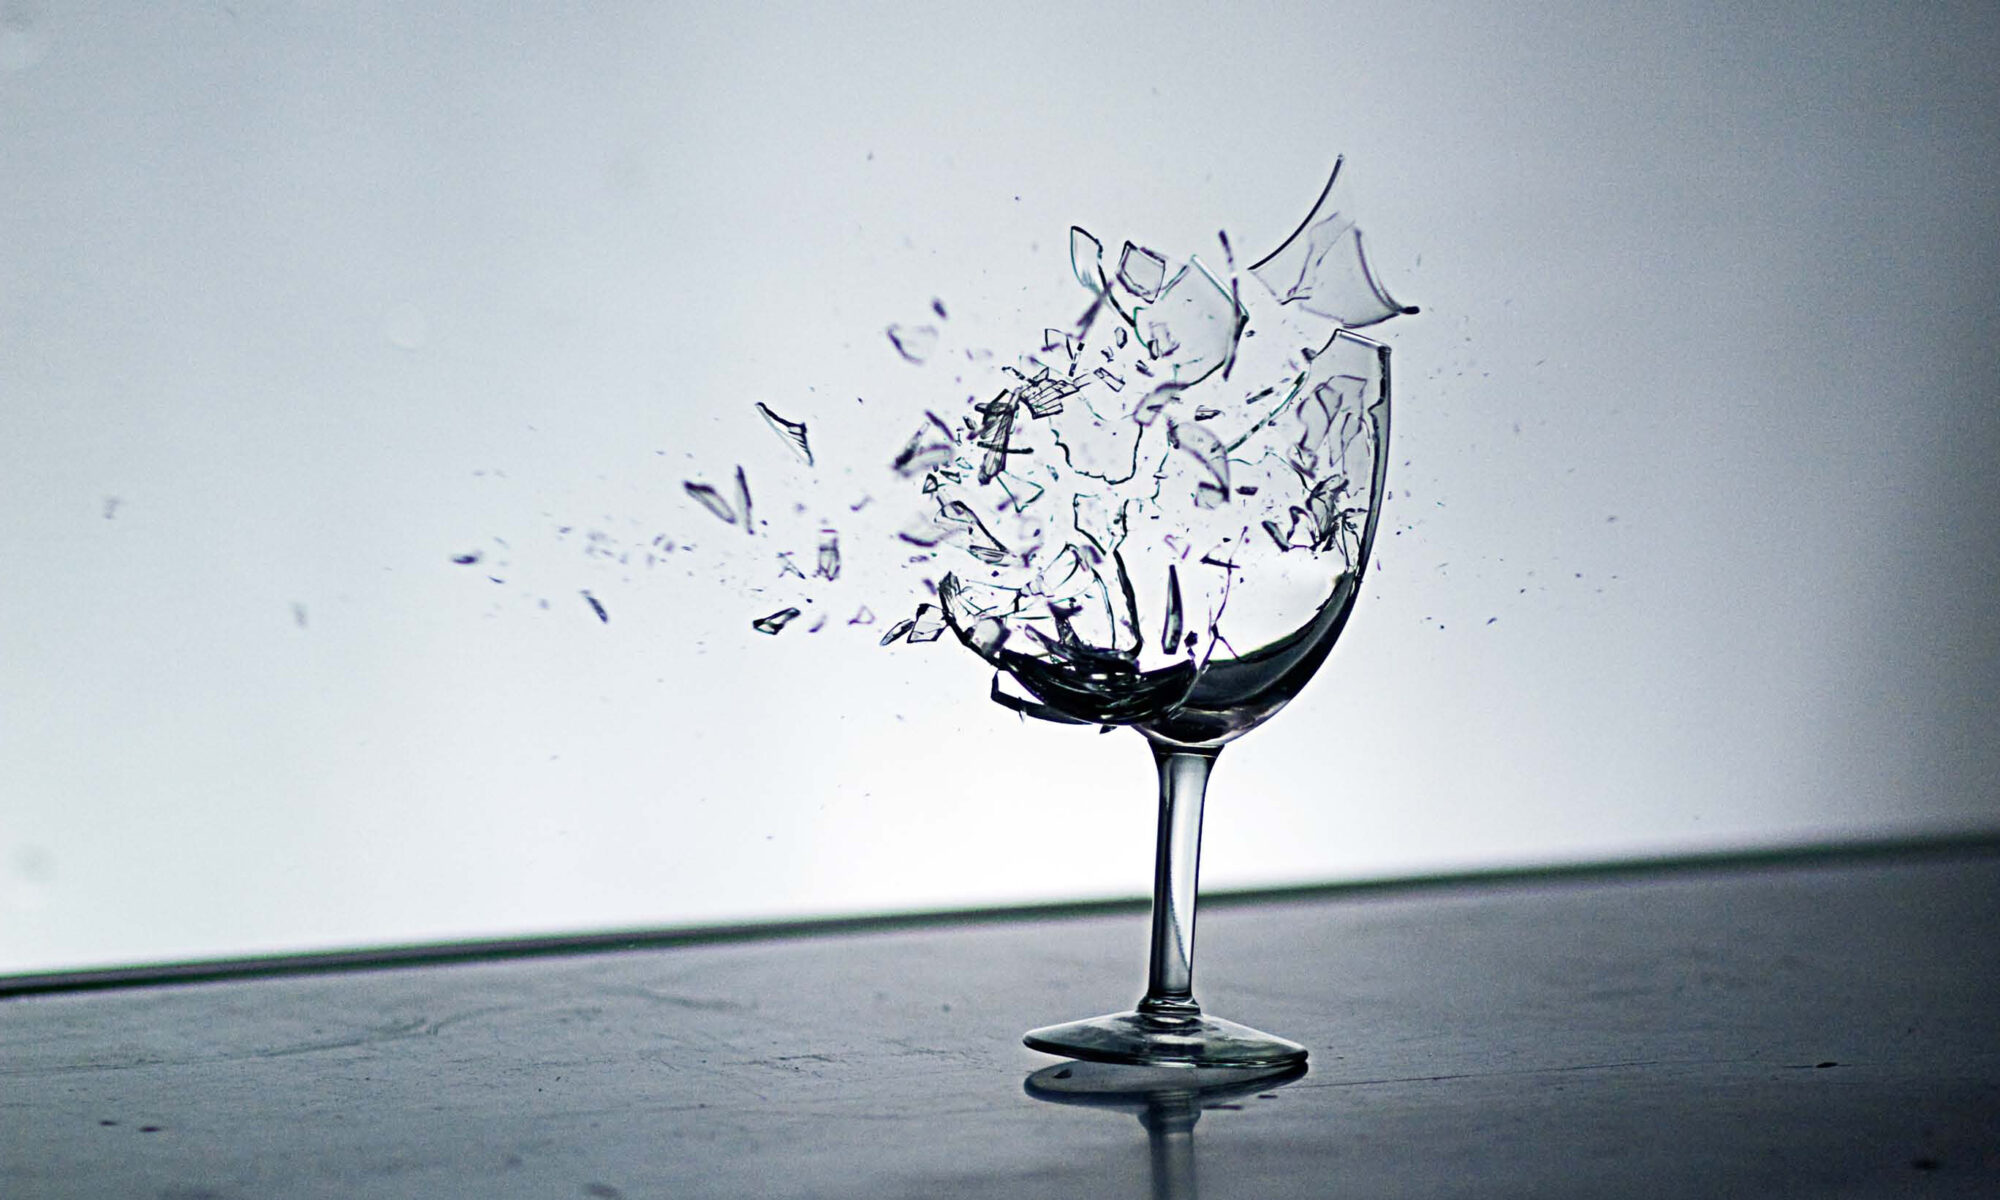 photo of wine glass shattering